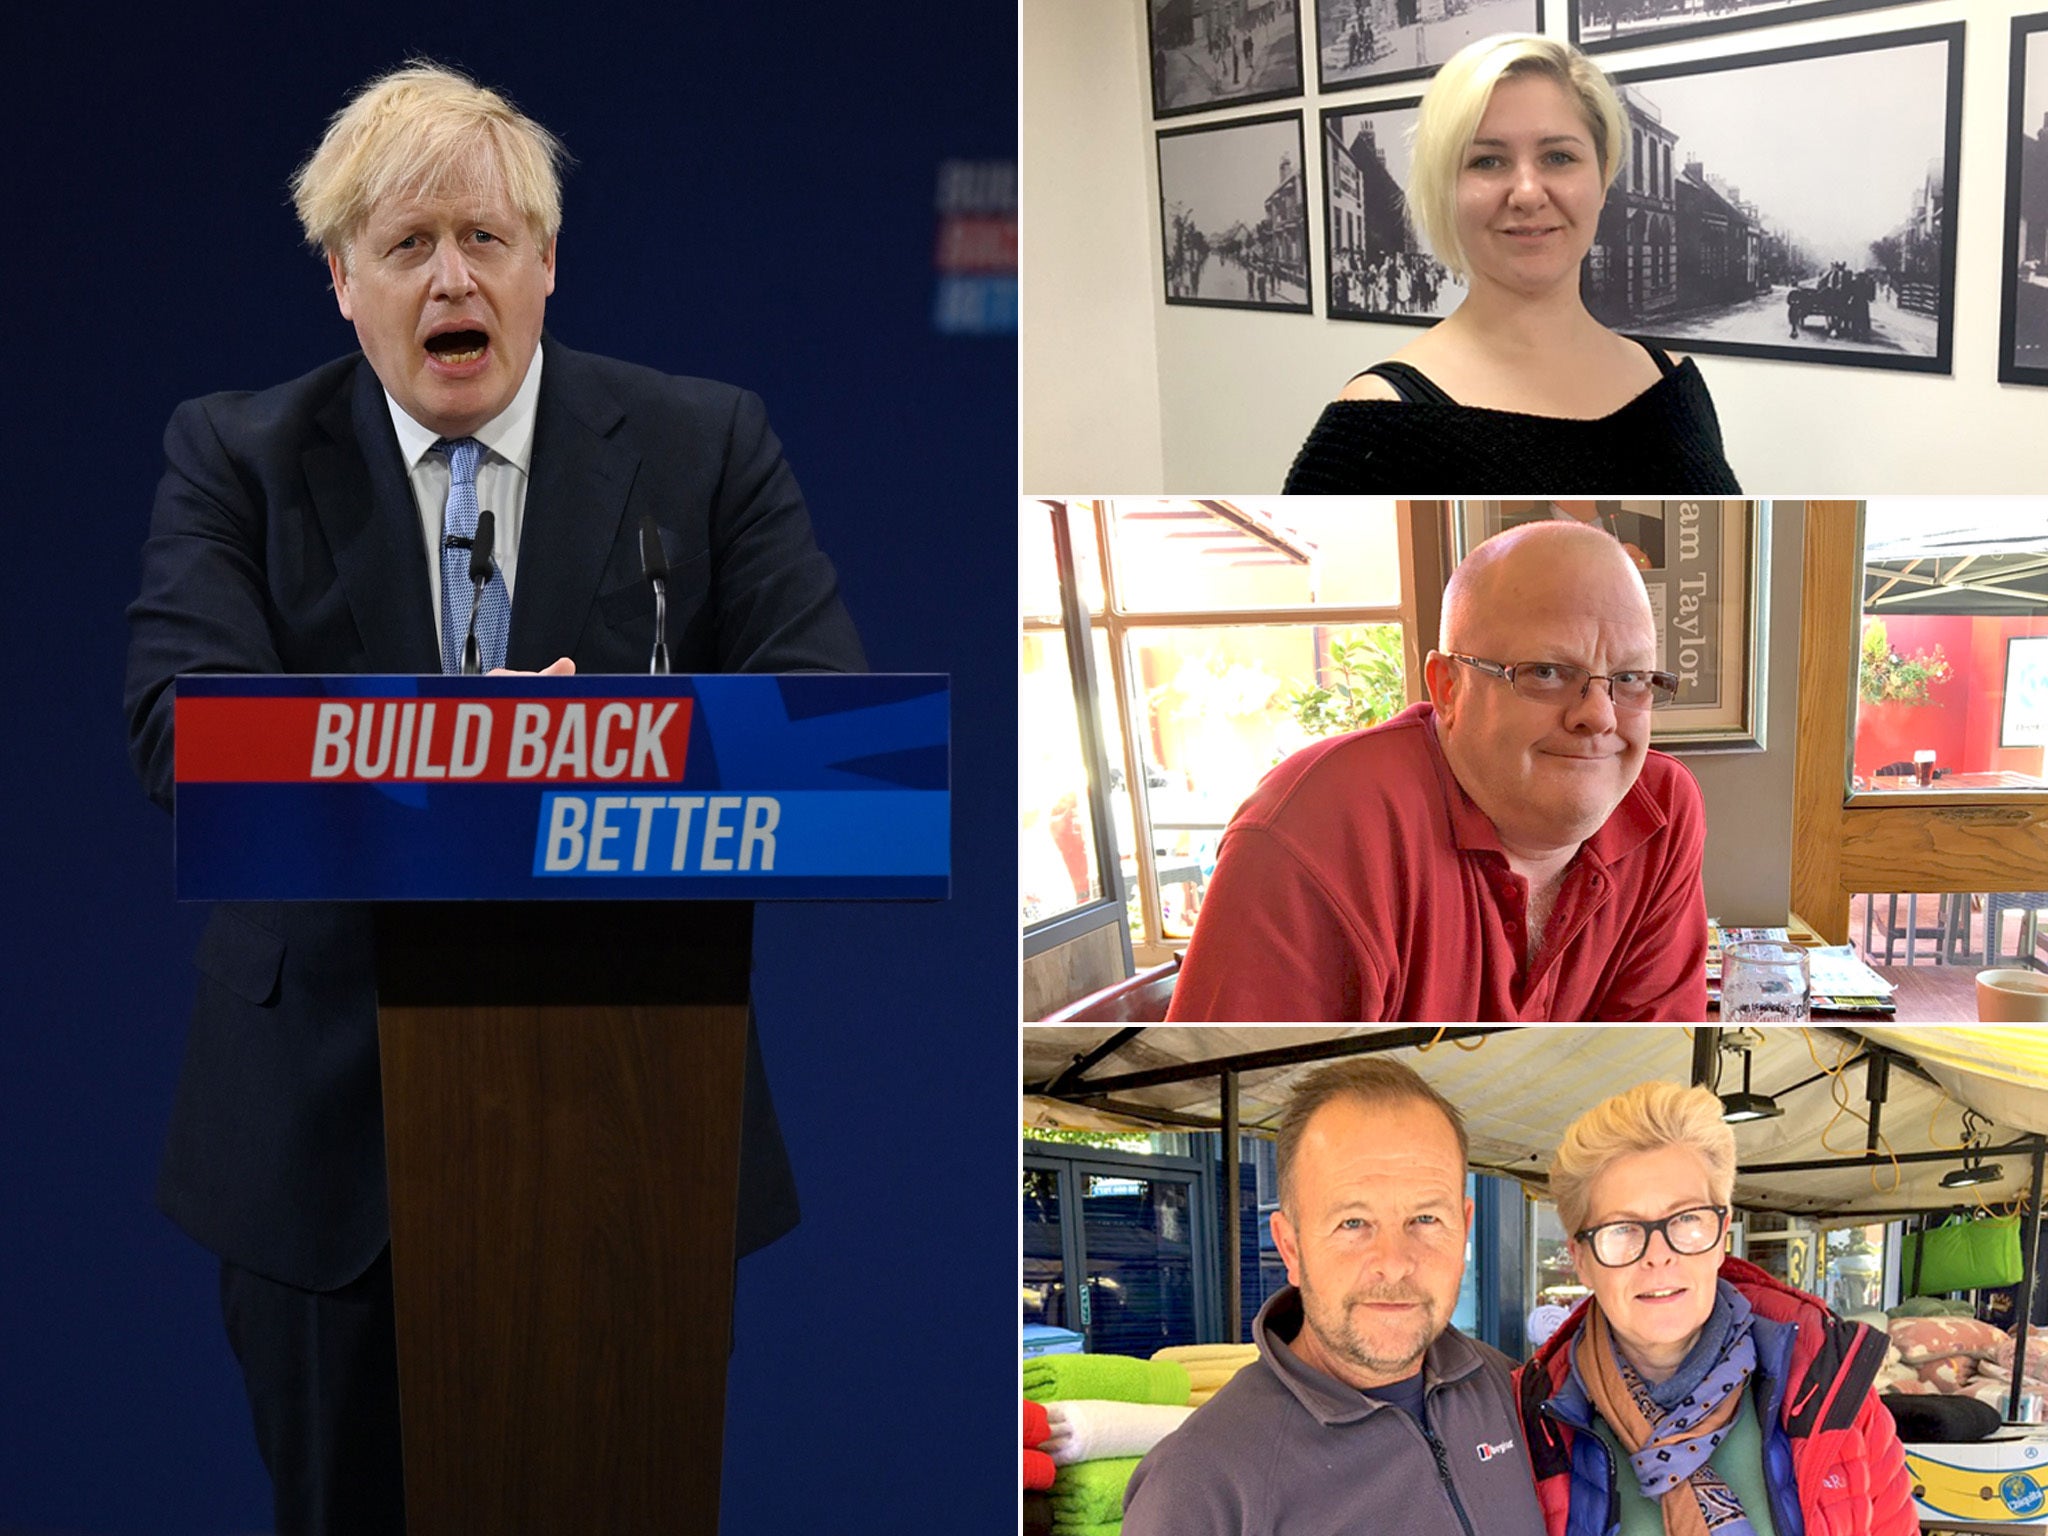 Worksop was once a confirmed red wall town, but the force of ‘BoJo’ remains strong with locals